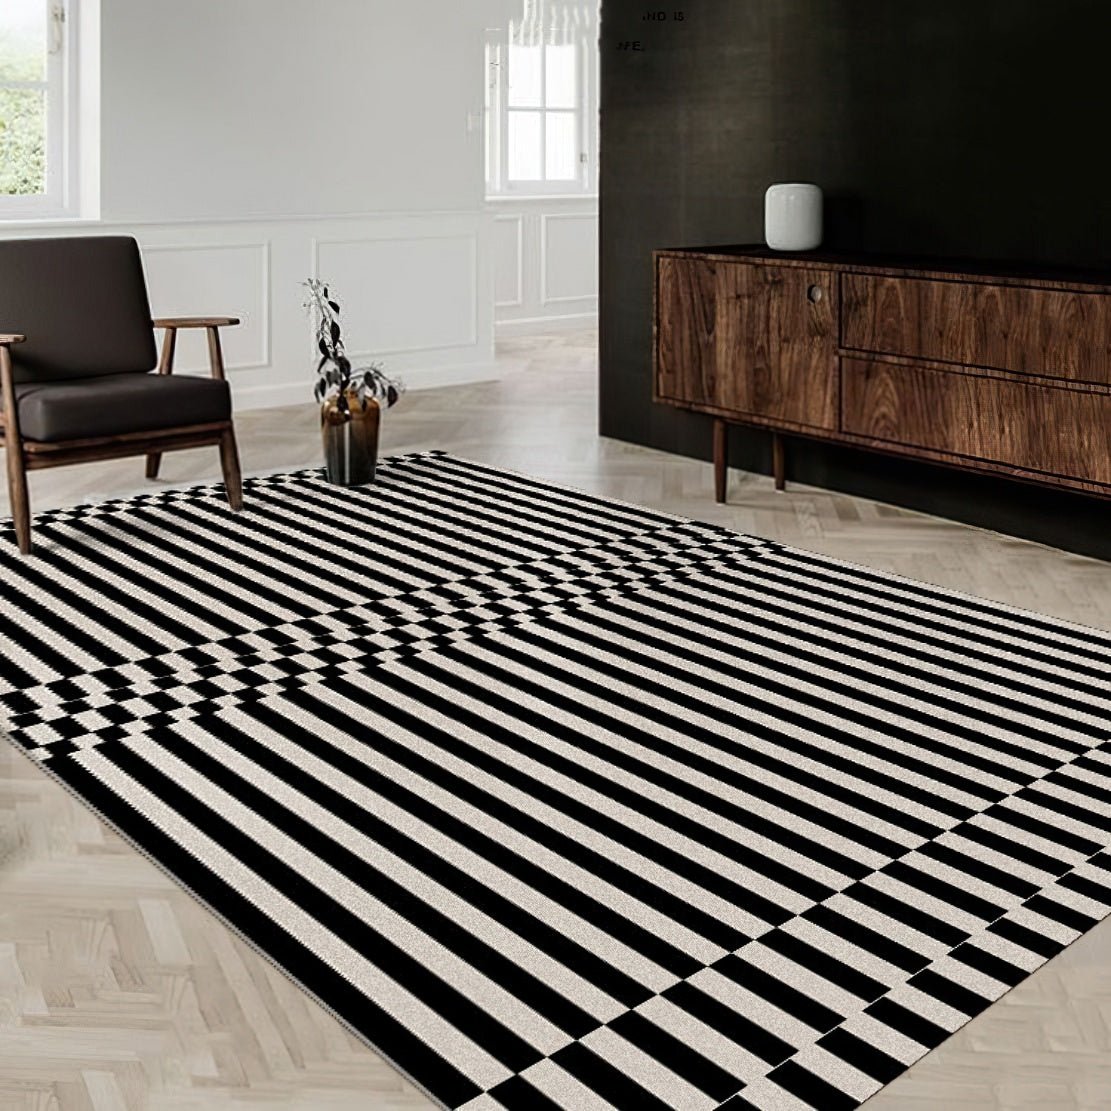 Modern living room with a black and white optical line floor rug.